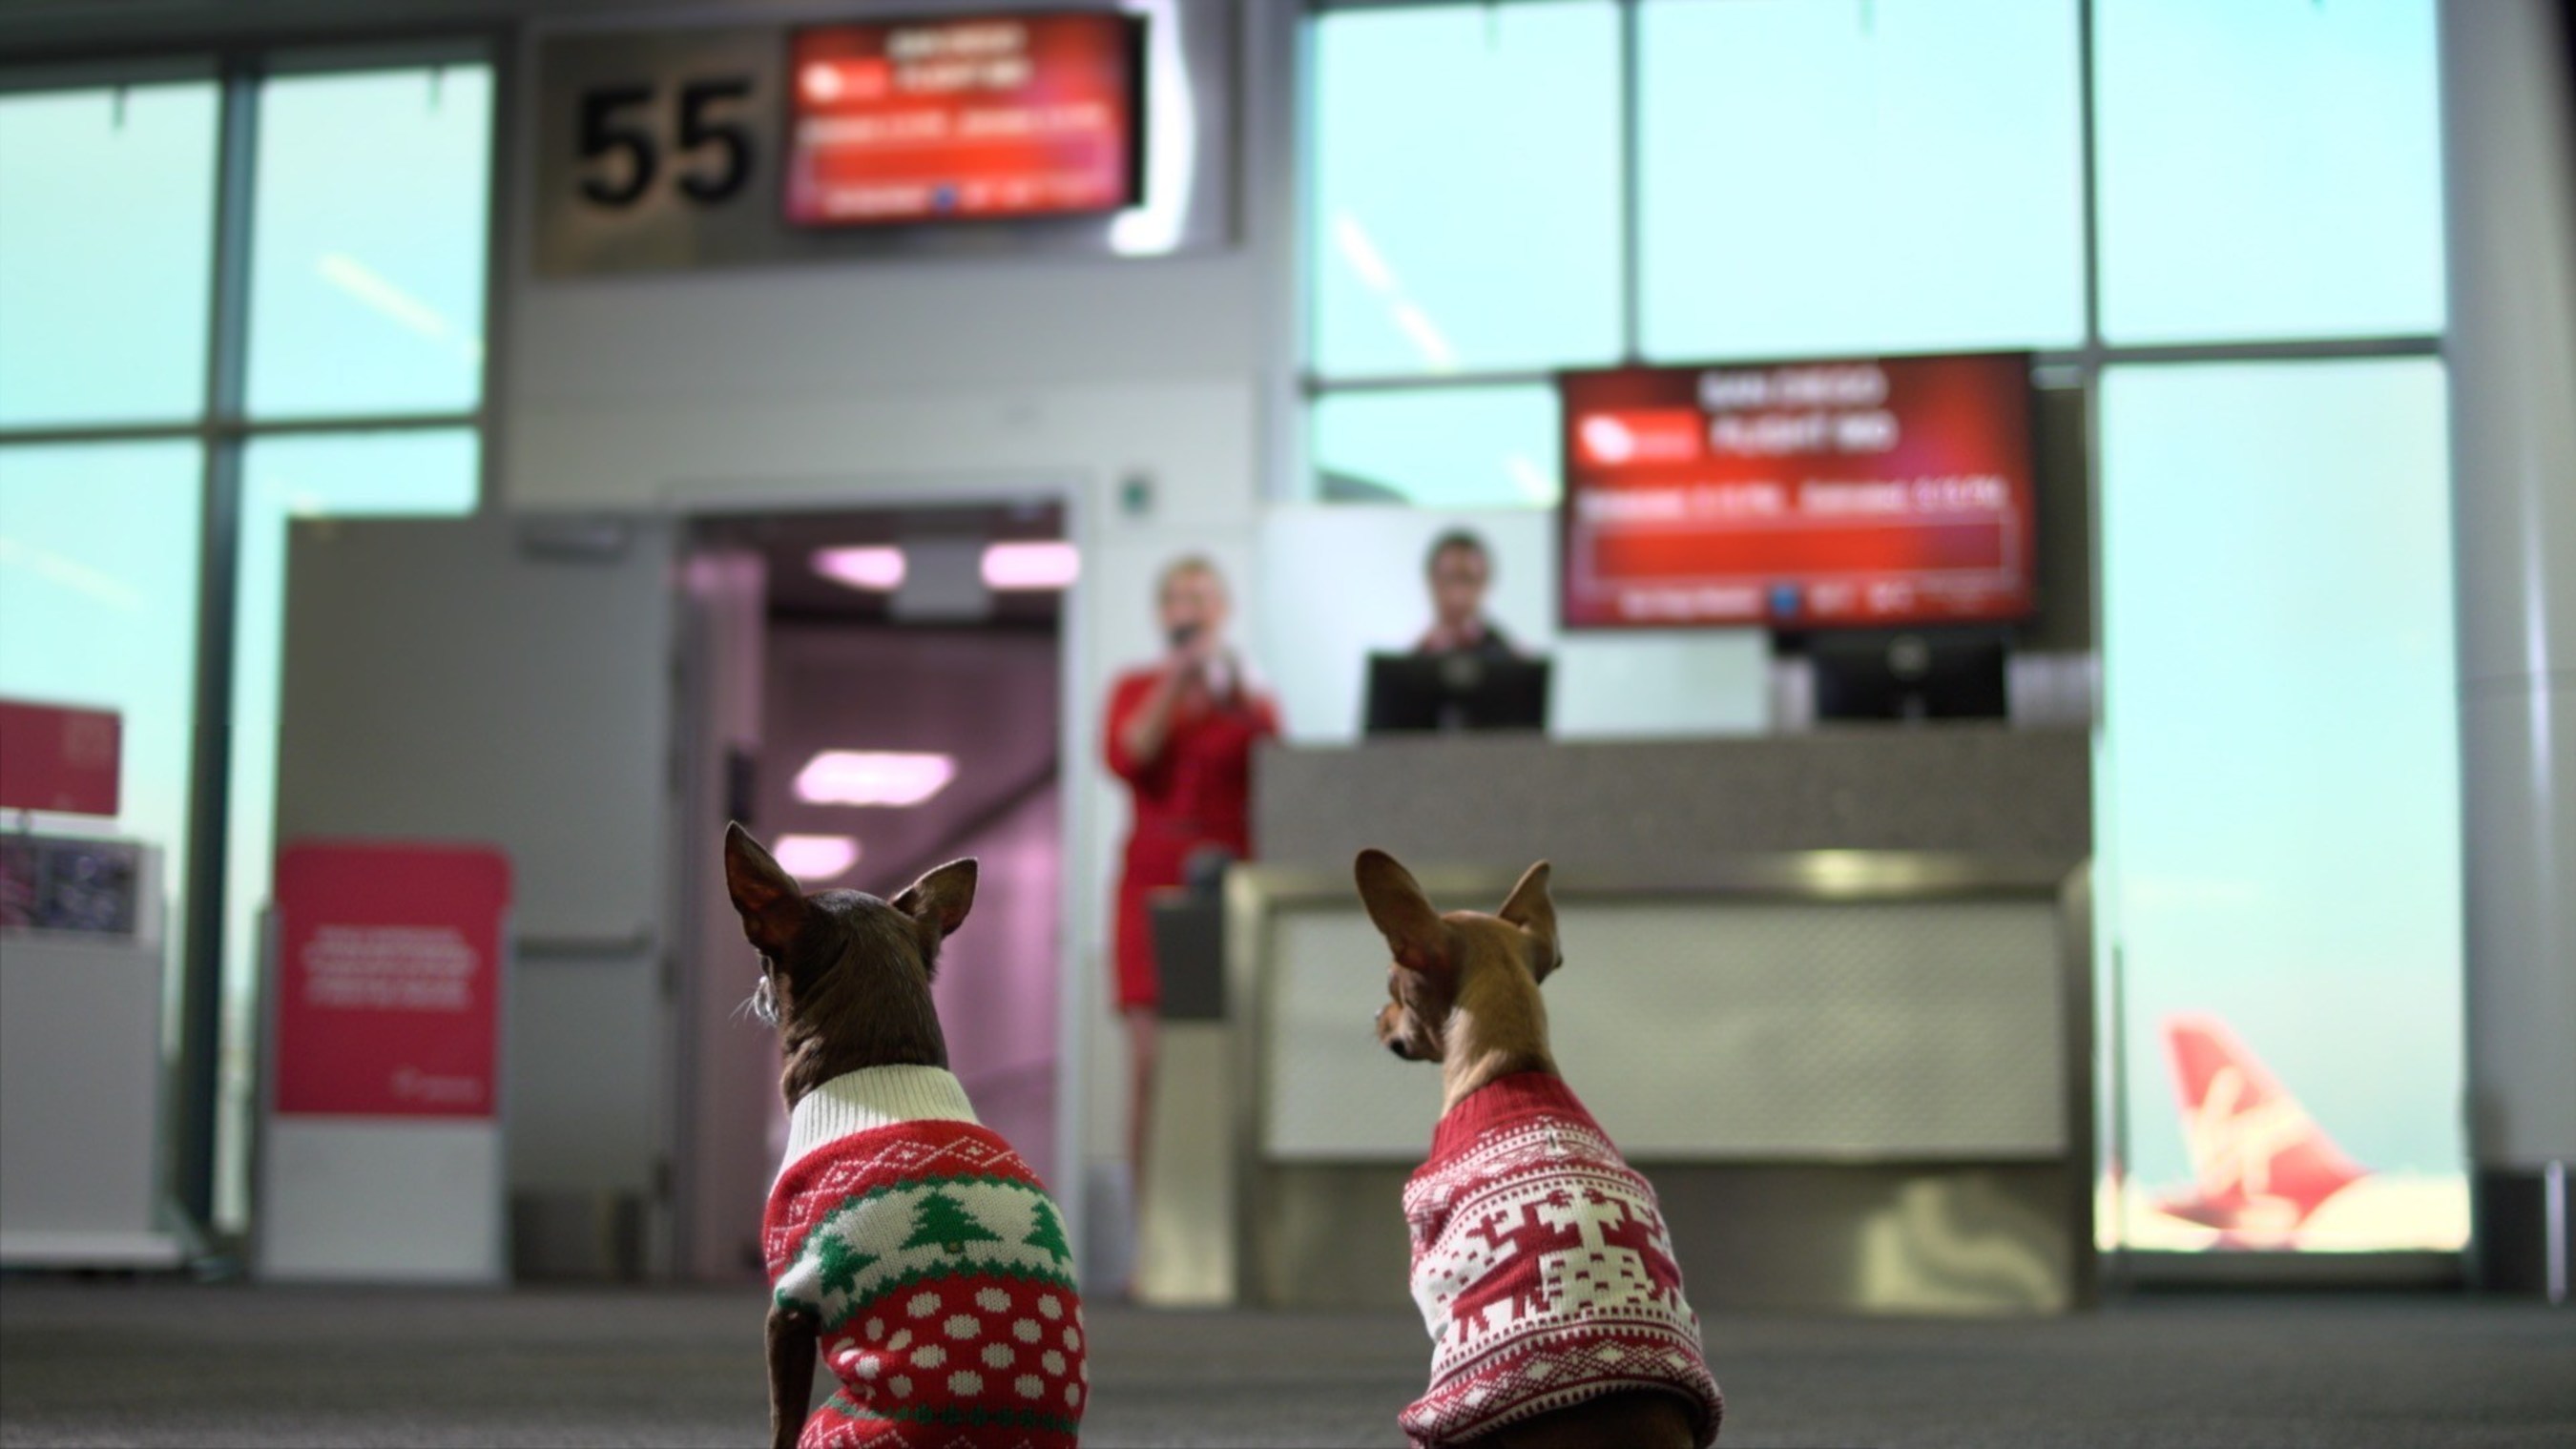 VIRGIN AMERICA UNLEASHES #TINYDOGSTINYFARES CYBER MONDAY DEAL AND OPERATION CHIHUAHUA AIRLIFT